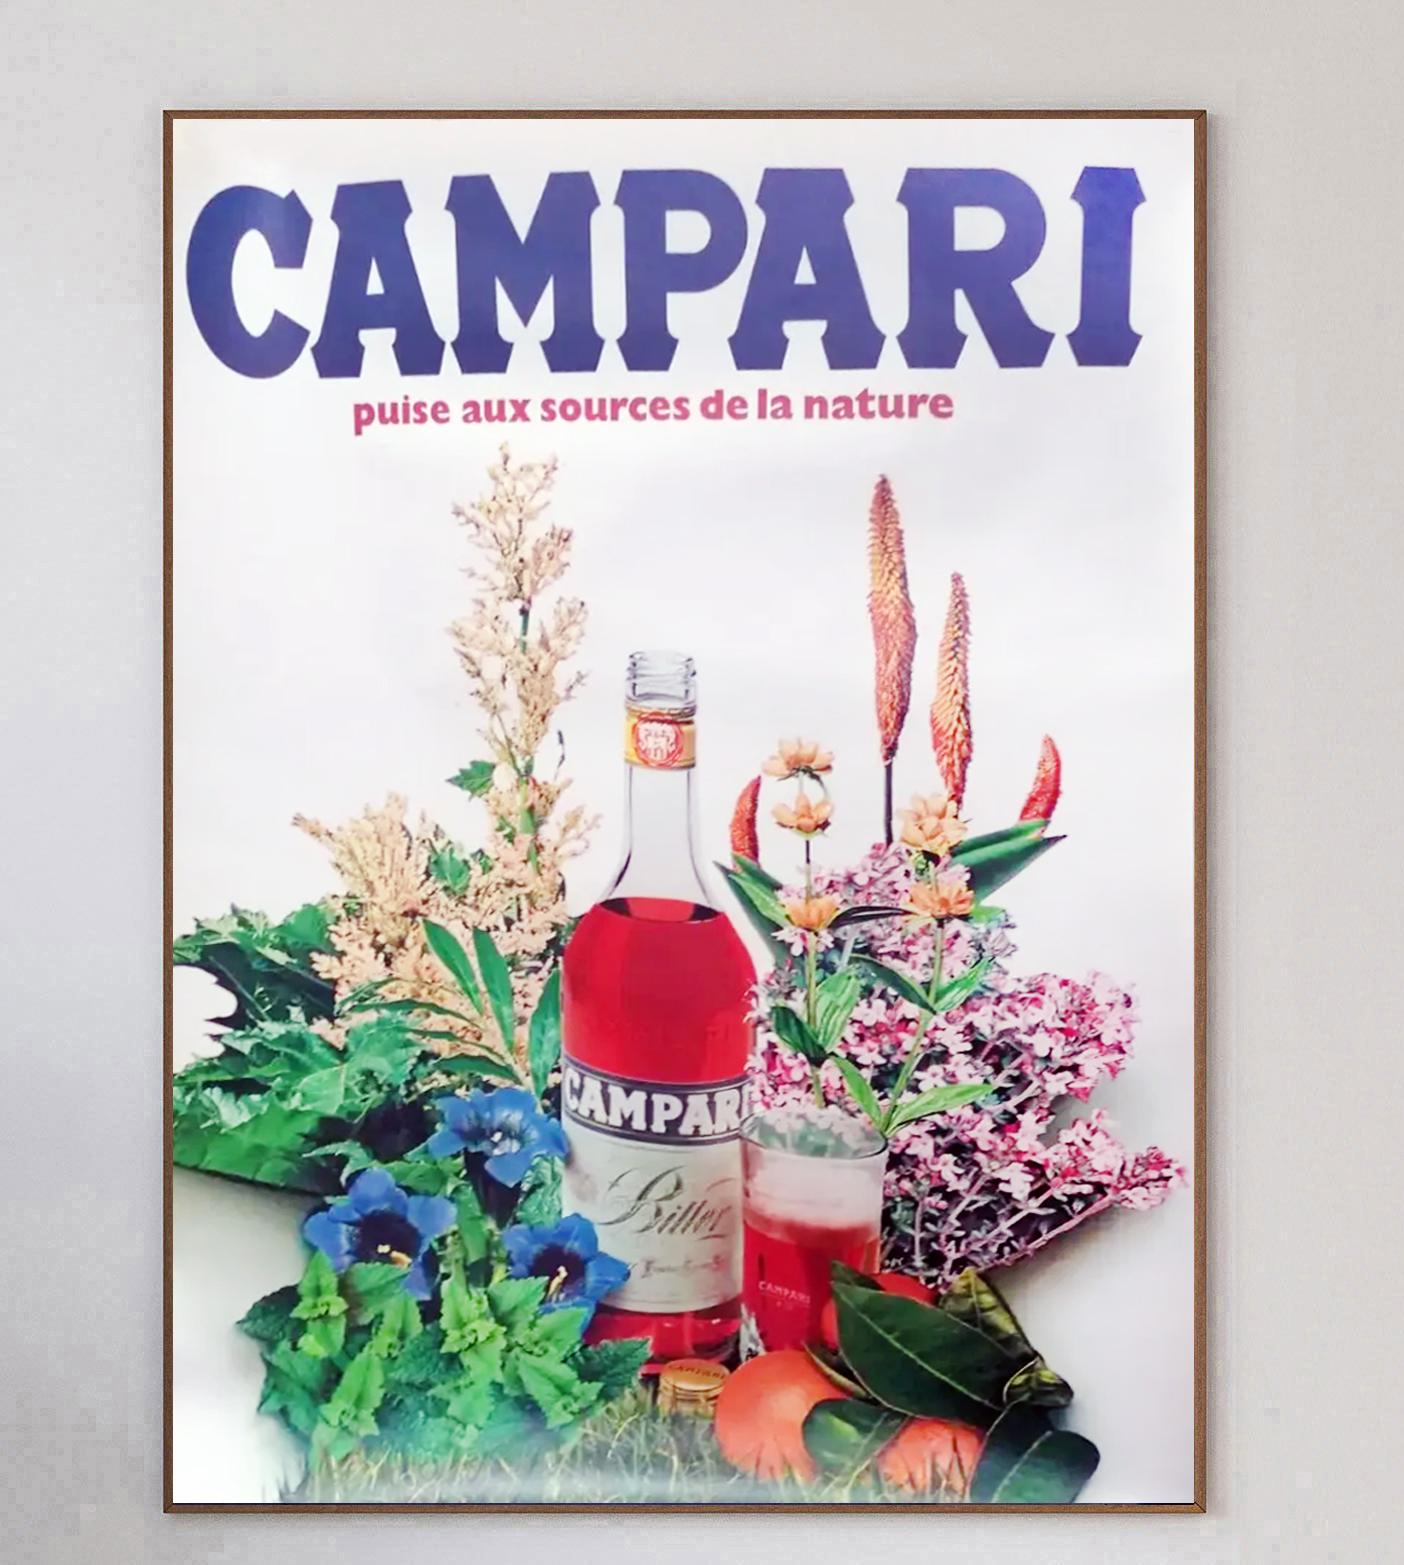 Iconic Italian liqueur brand Campari collaborated with many artists throughout the 20th century, creating wonderful and timeless artworks. Campari was formed in 1860 by Gaspare Campari and the aperitif is as popular today as ever. His son, Davide